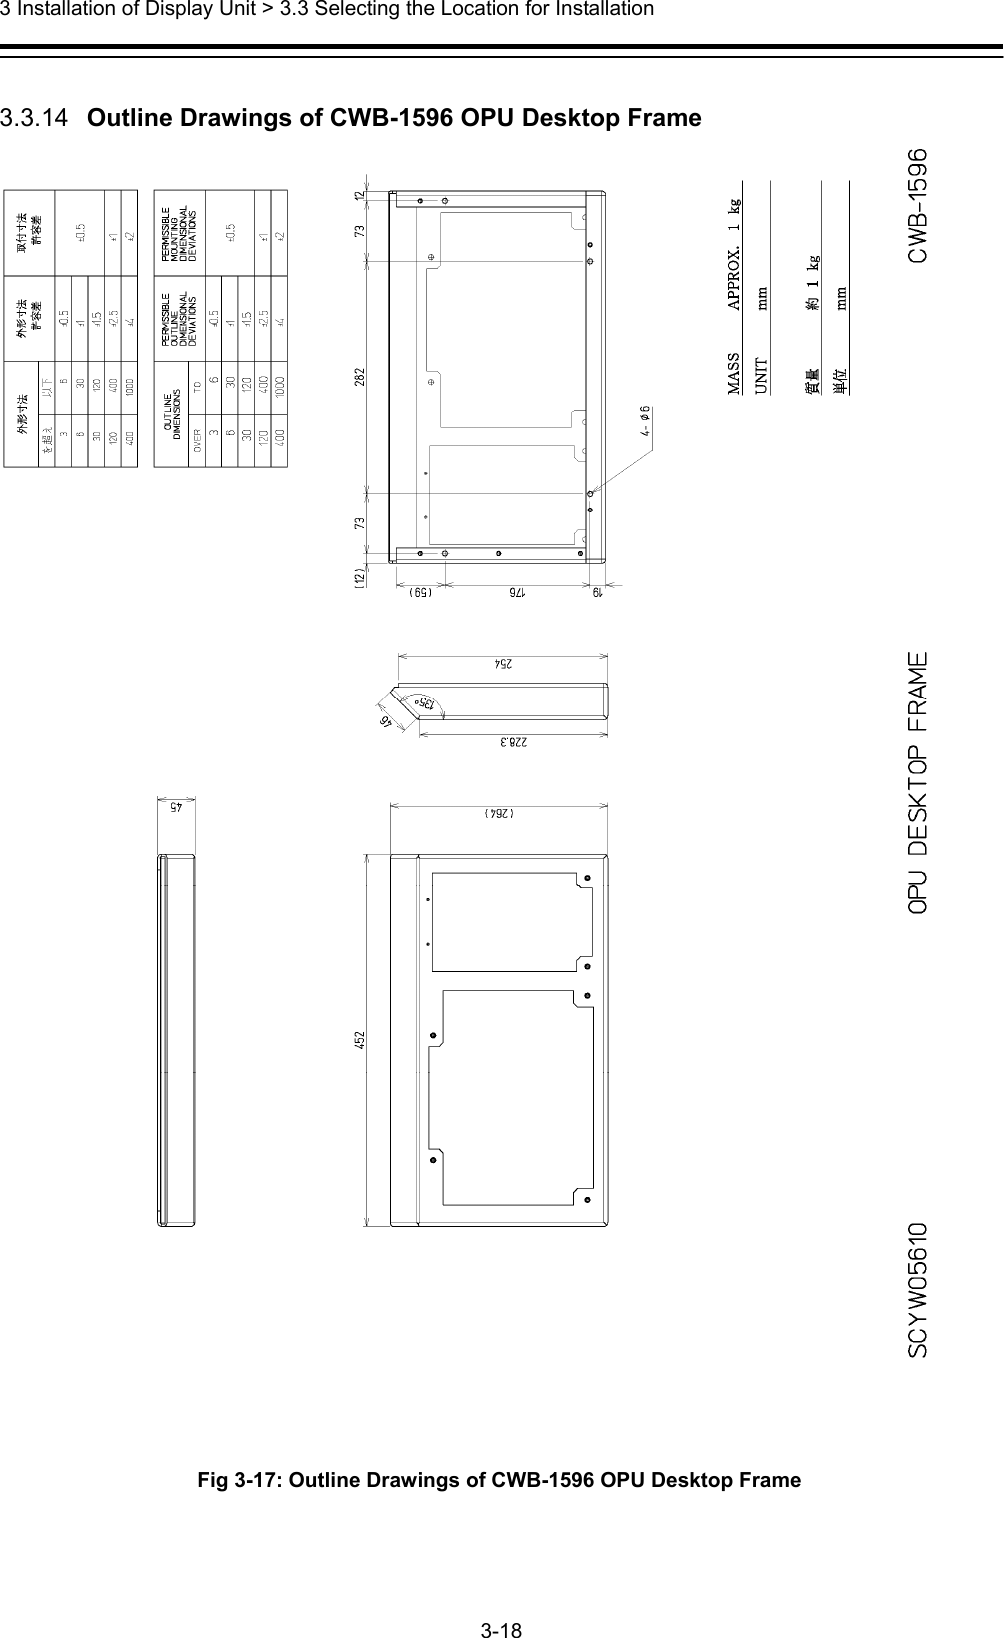  3 Installation of Display Unit &gt; 3.3 Selecting the Location for Installation 3-18   3.3.14   Outline Drawings of CWB-1596 OPU Desktop Frame  Fig 3-17: Outline Drawings of CWB-1596 OPU Desktop Frame 